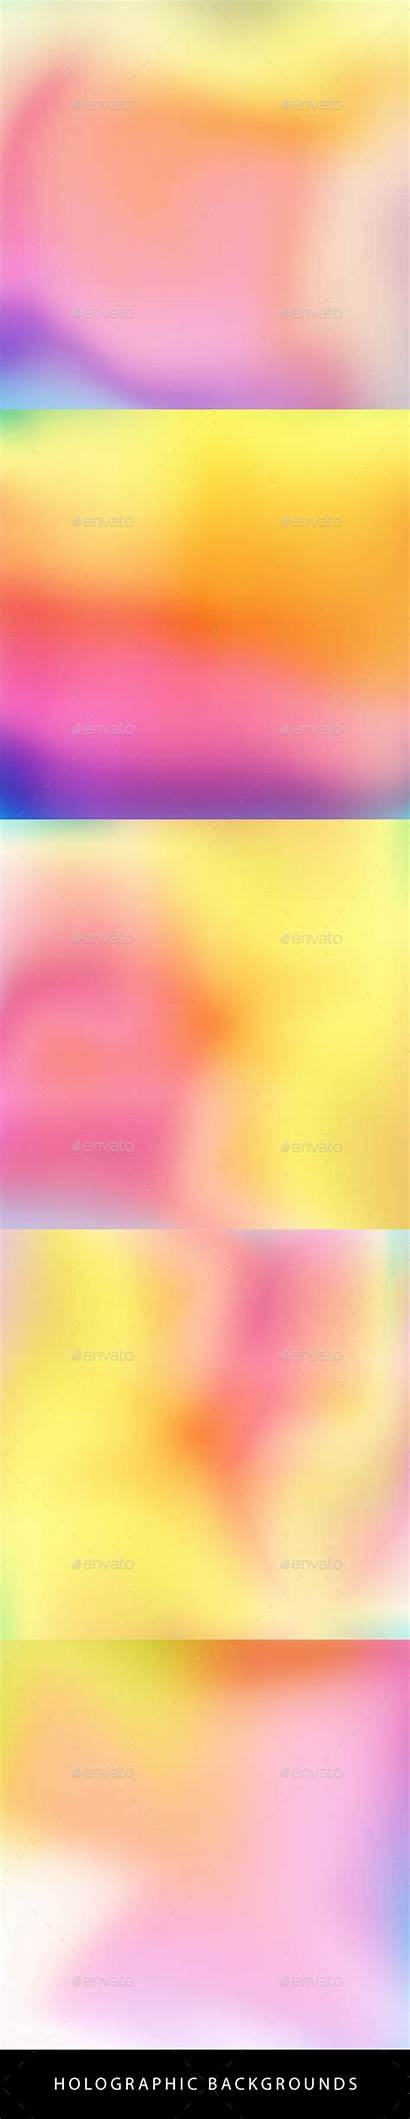 Holographic Background Graphicriver Templates Backgrounds